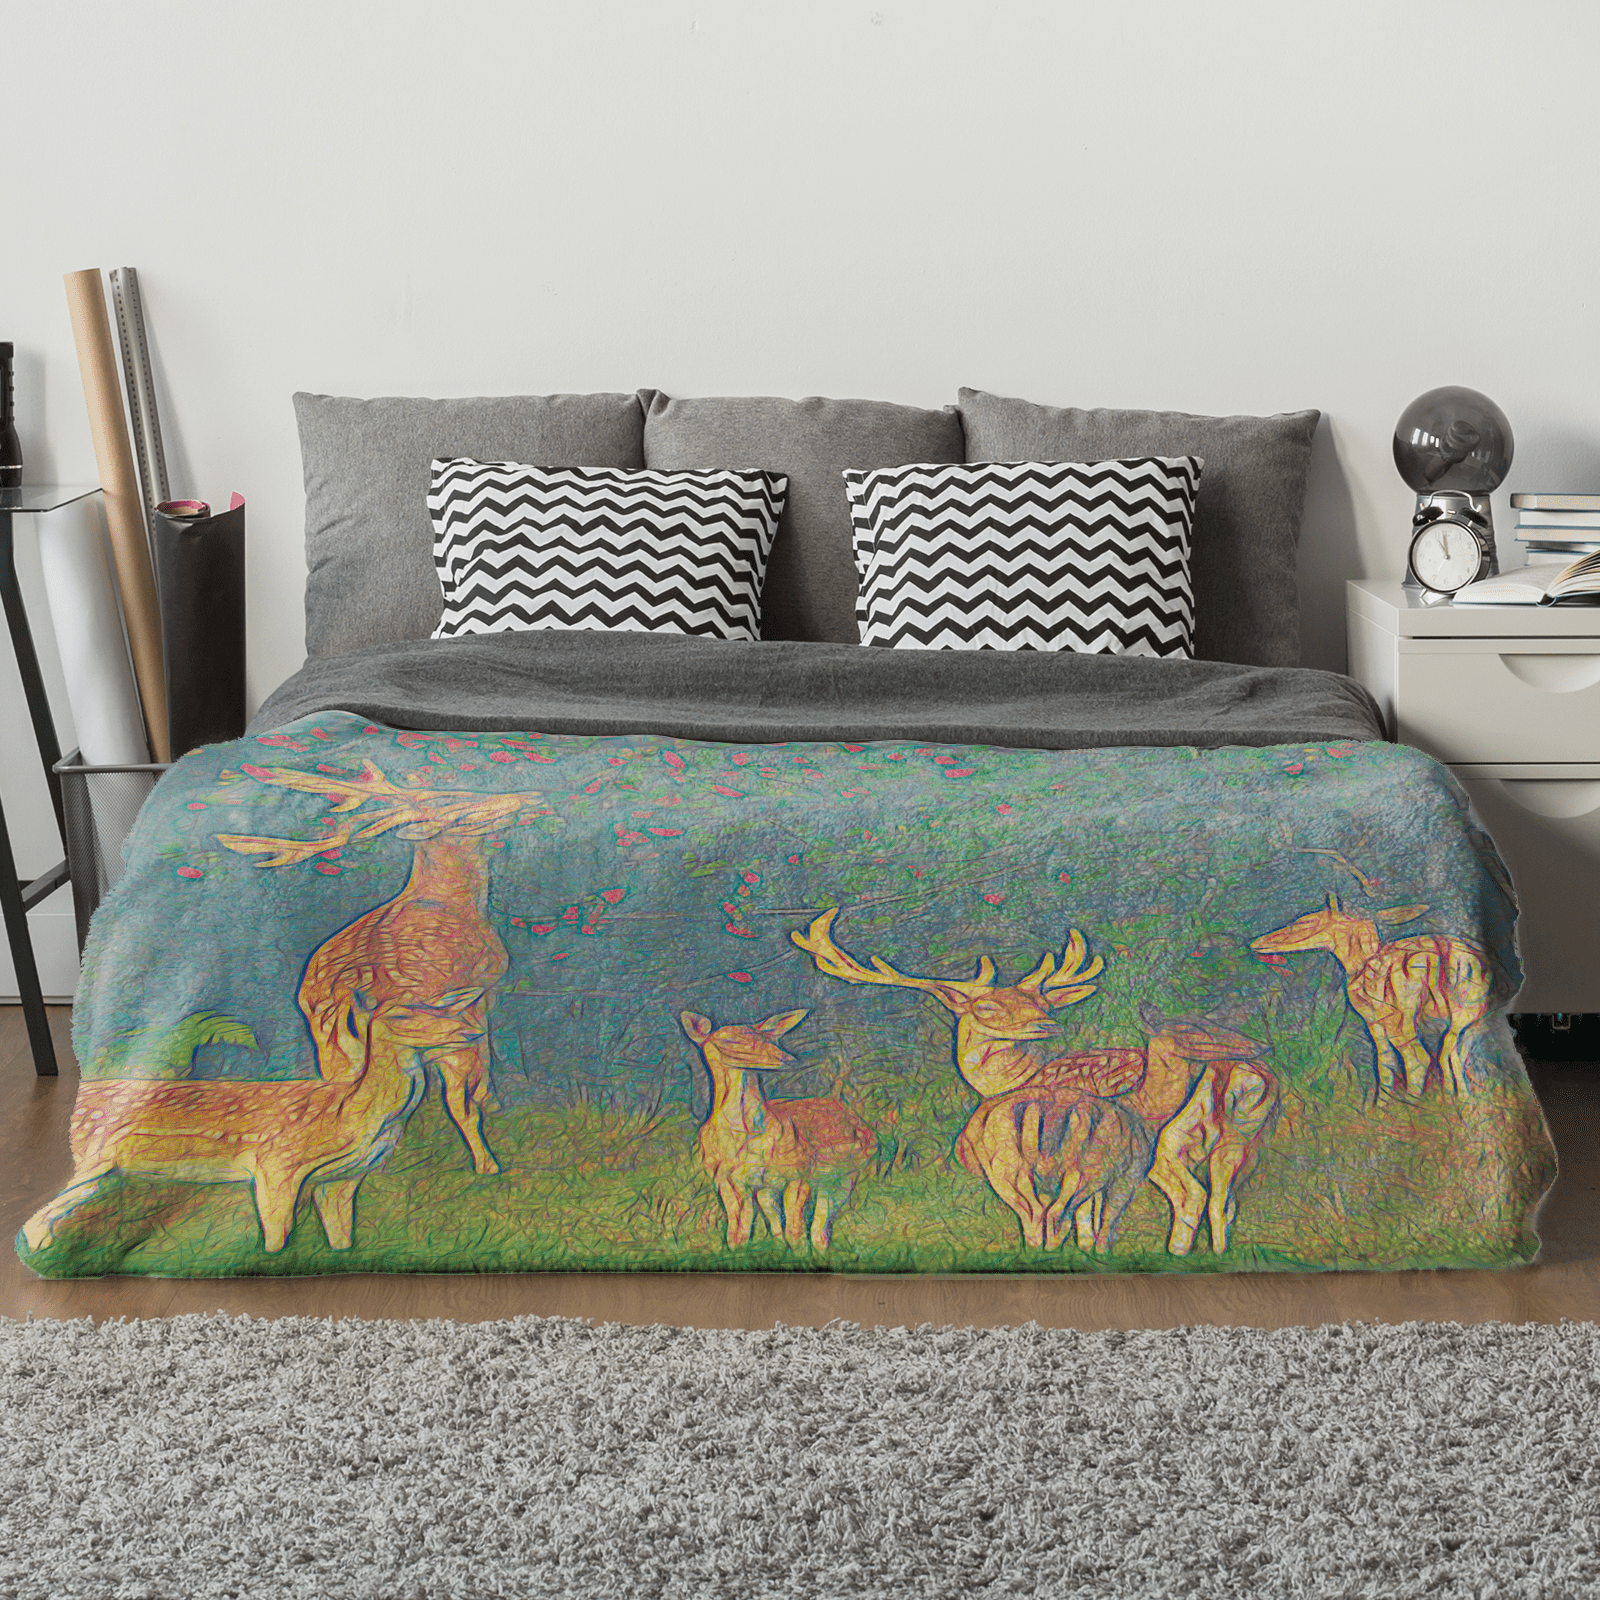 Pack of deers in the forest. Blanket Premium  200 x 150 cm / 60" x 80"